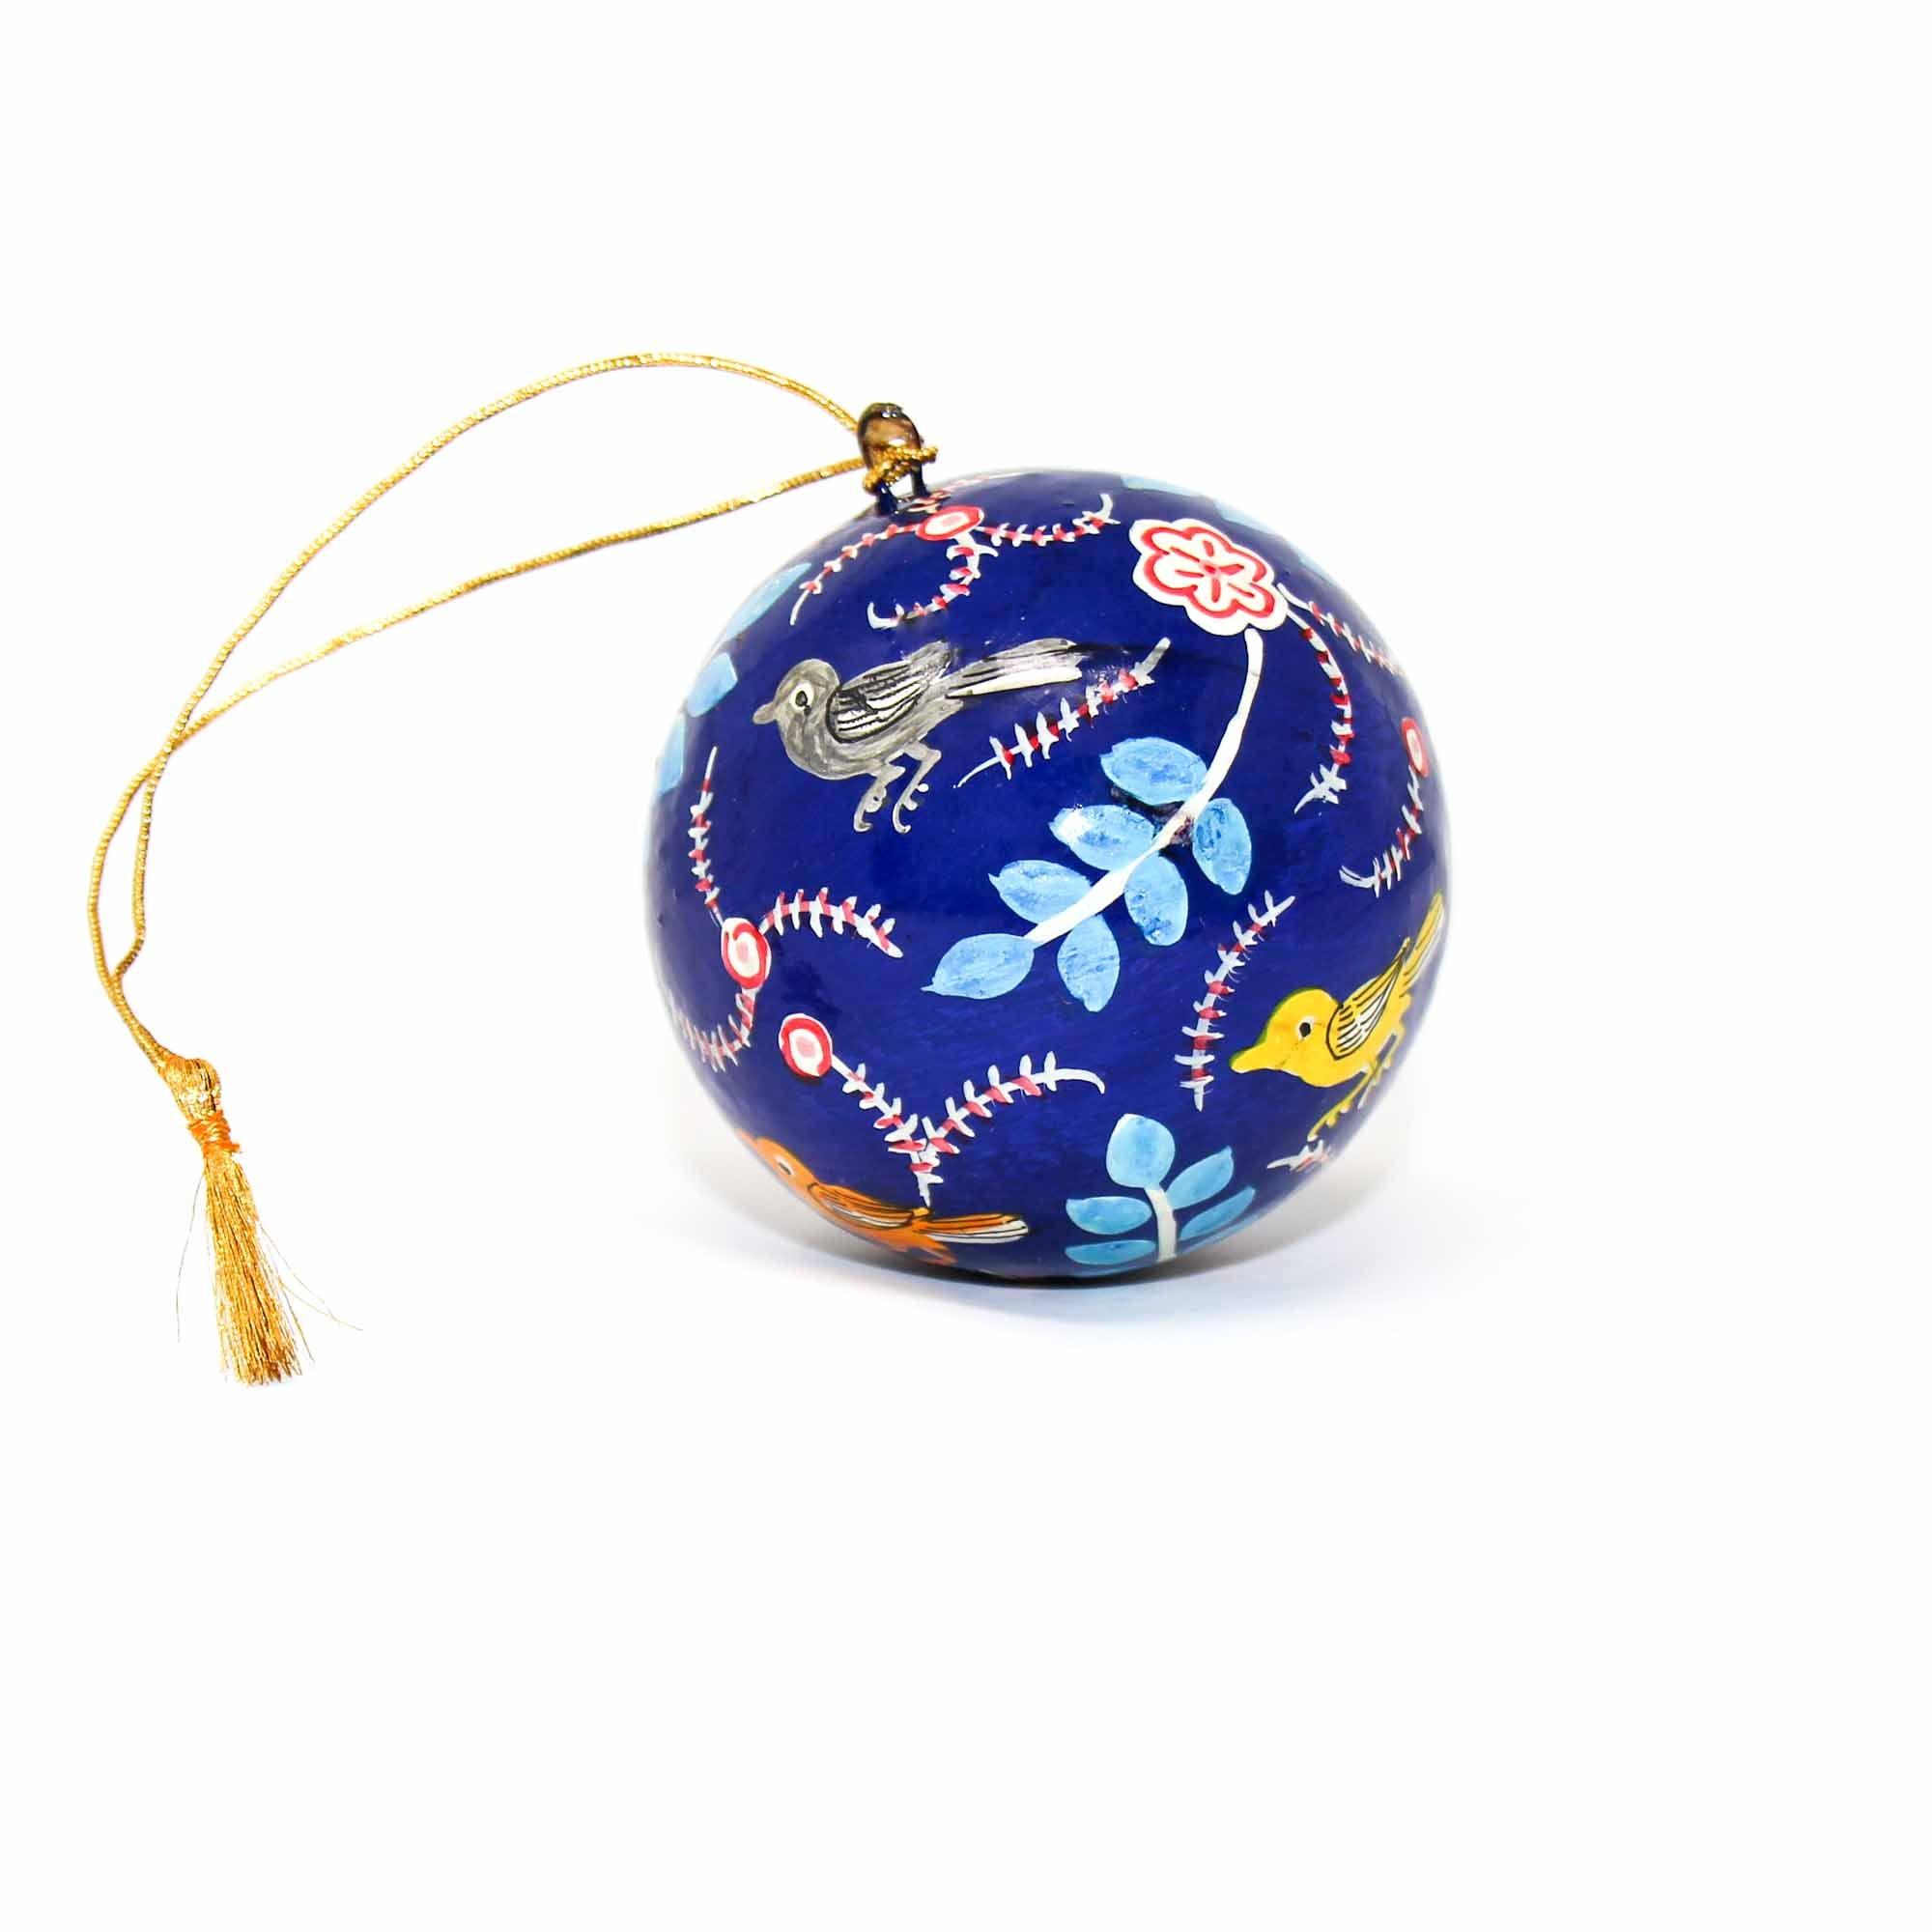 Handpainted Birds with Flowers Ornament, Set of 2 - Flyclothing LLC